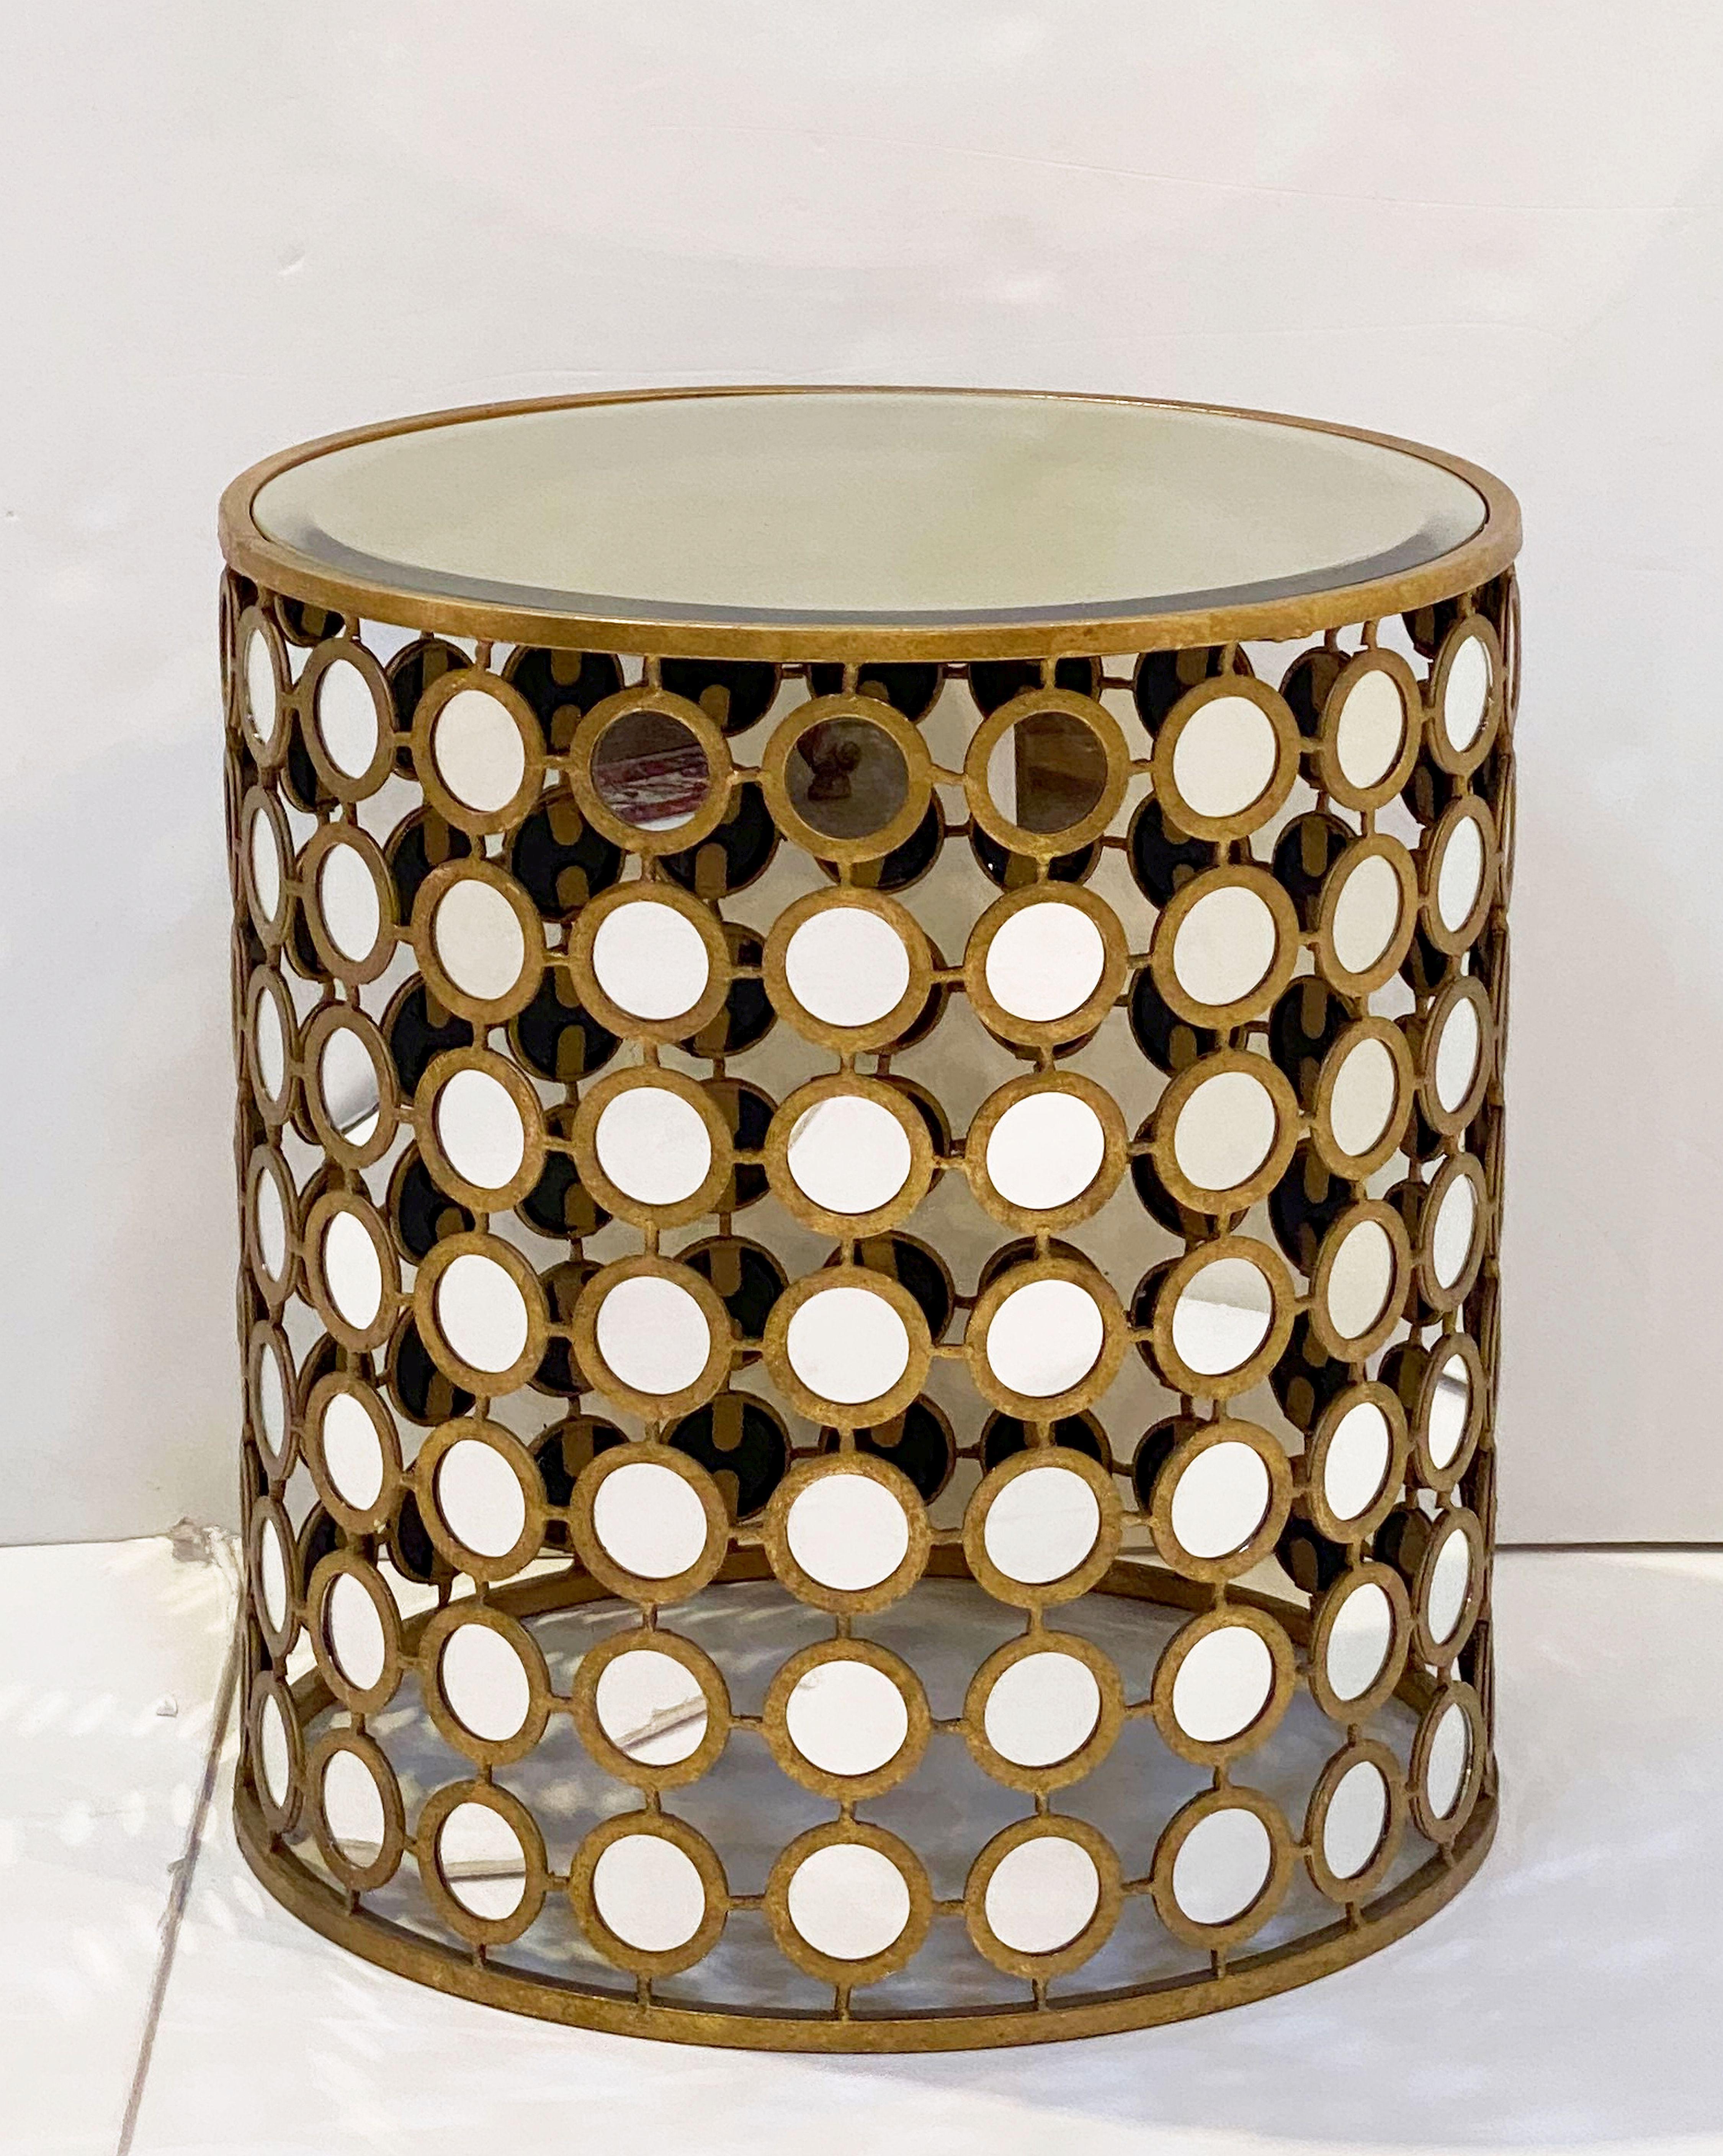 A fine French round (or barrel shaped) side or end table, featuring a circular beveled gold-tinted mirrored glass over a gilt metal base of small round mirrors in a stylish grid around the circumference.



 